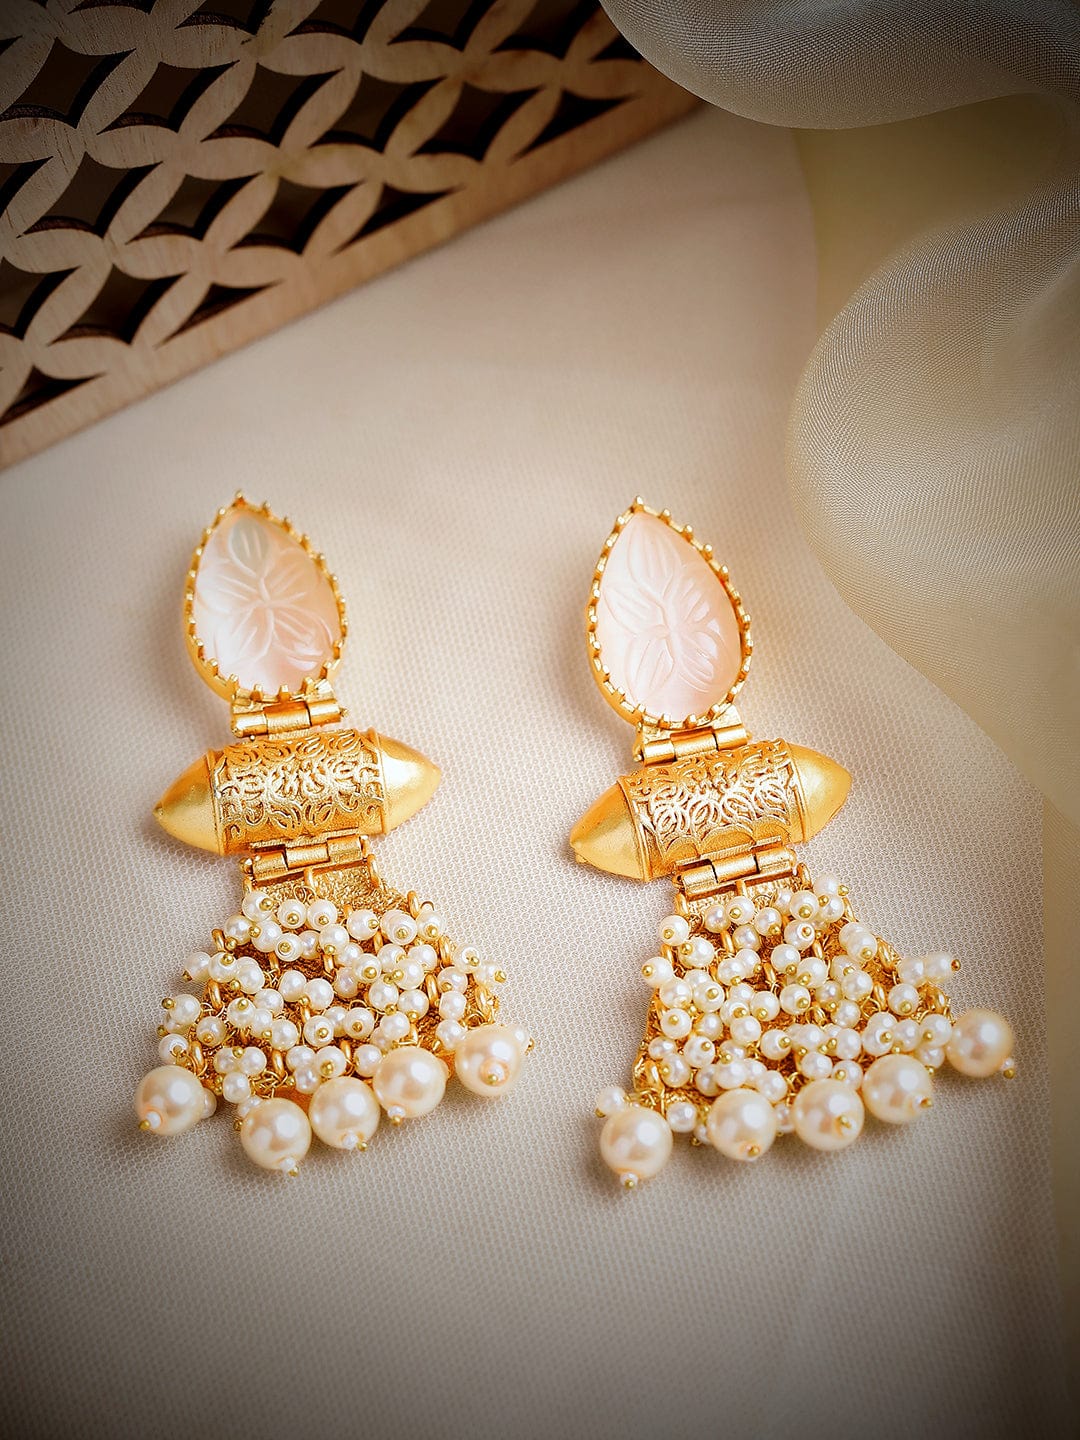 Buy latest pearl earrings white stone tops gold earring design for daily use